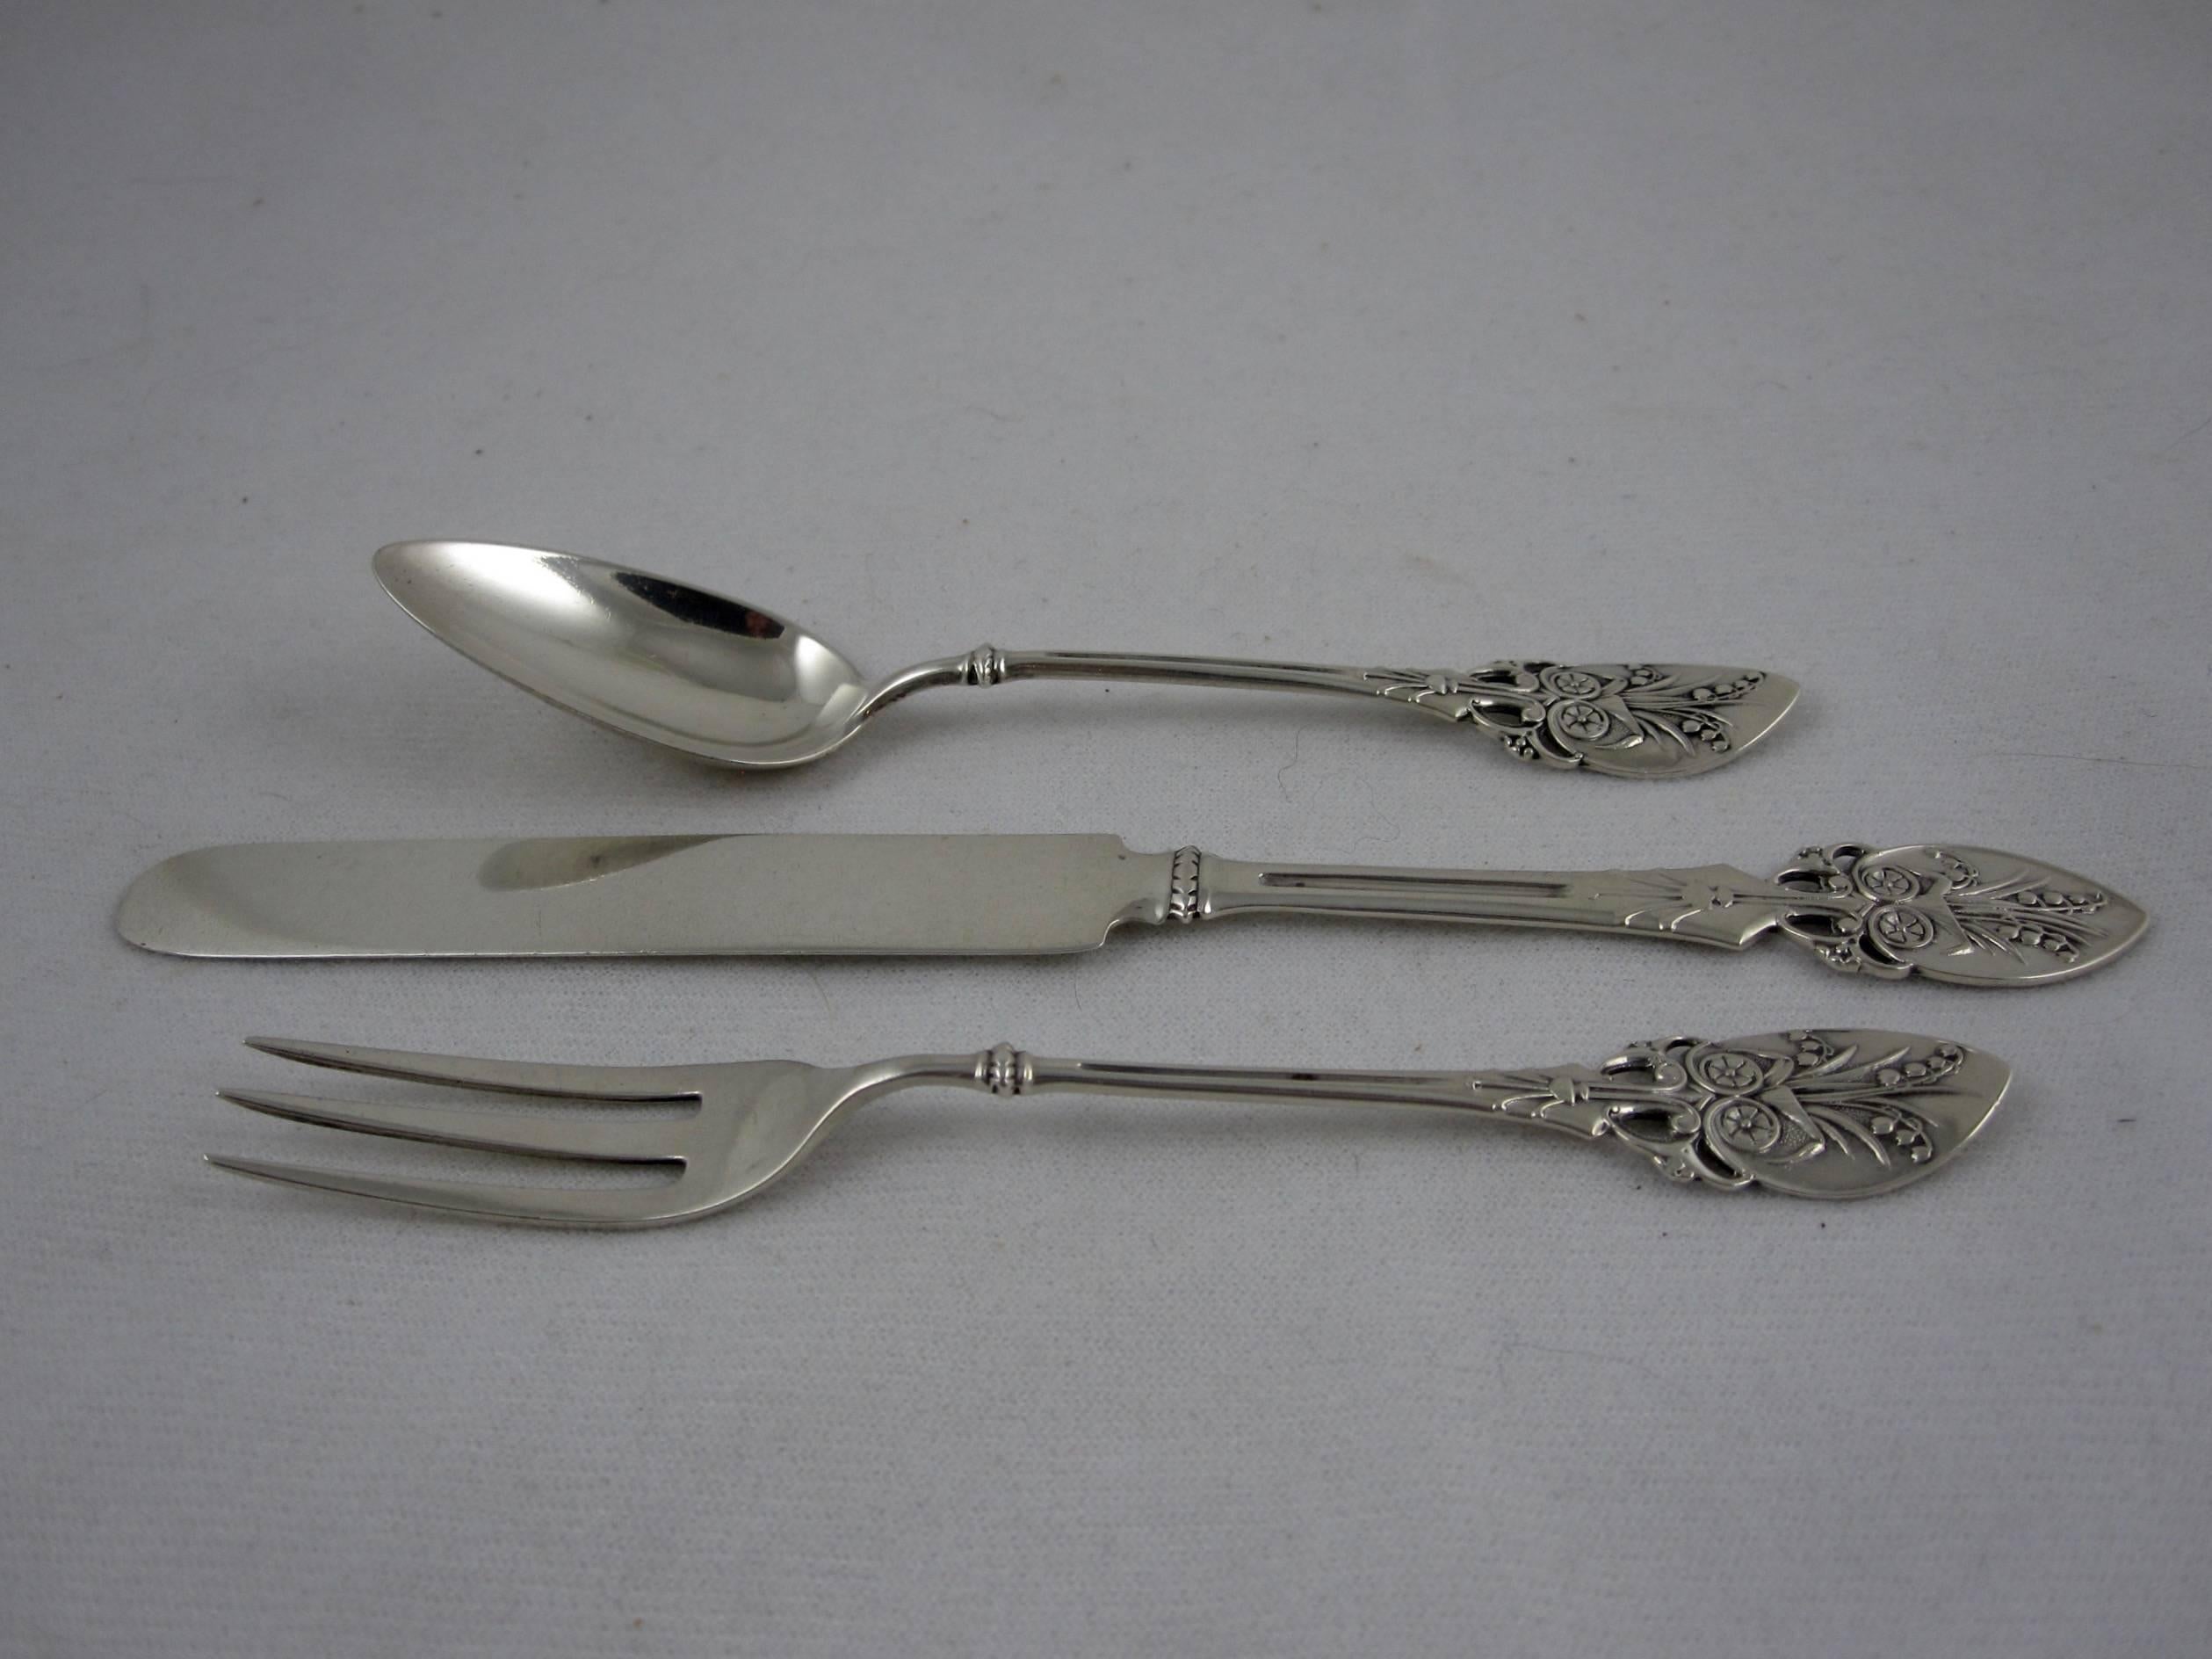 A gorgeous Victorian estate. sterling silver youth set in the Lily pattern, by Gorham Silver Co. Likely presented as a christening gift, this set is engraved with three intertwined initials and the year 1882 on the verso of each piece. It would make